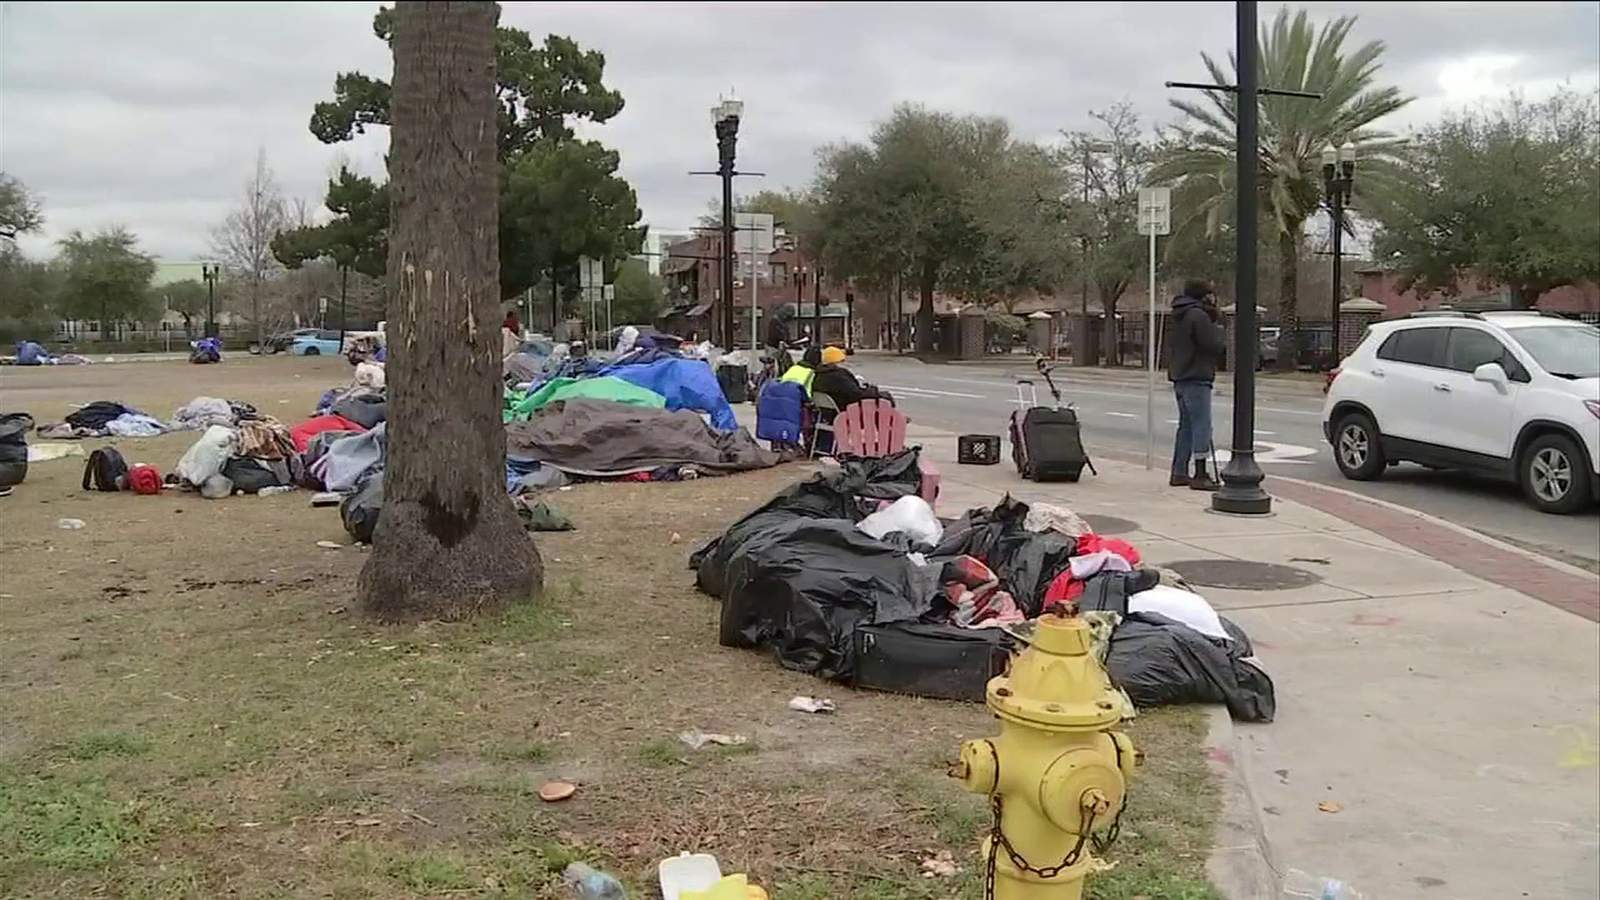 People living in Jacksonville homeless camp hope to soon have help